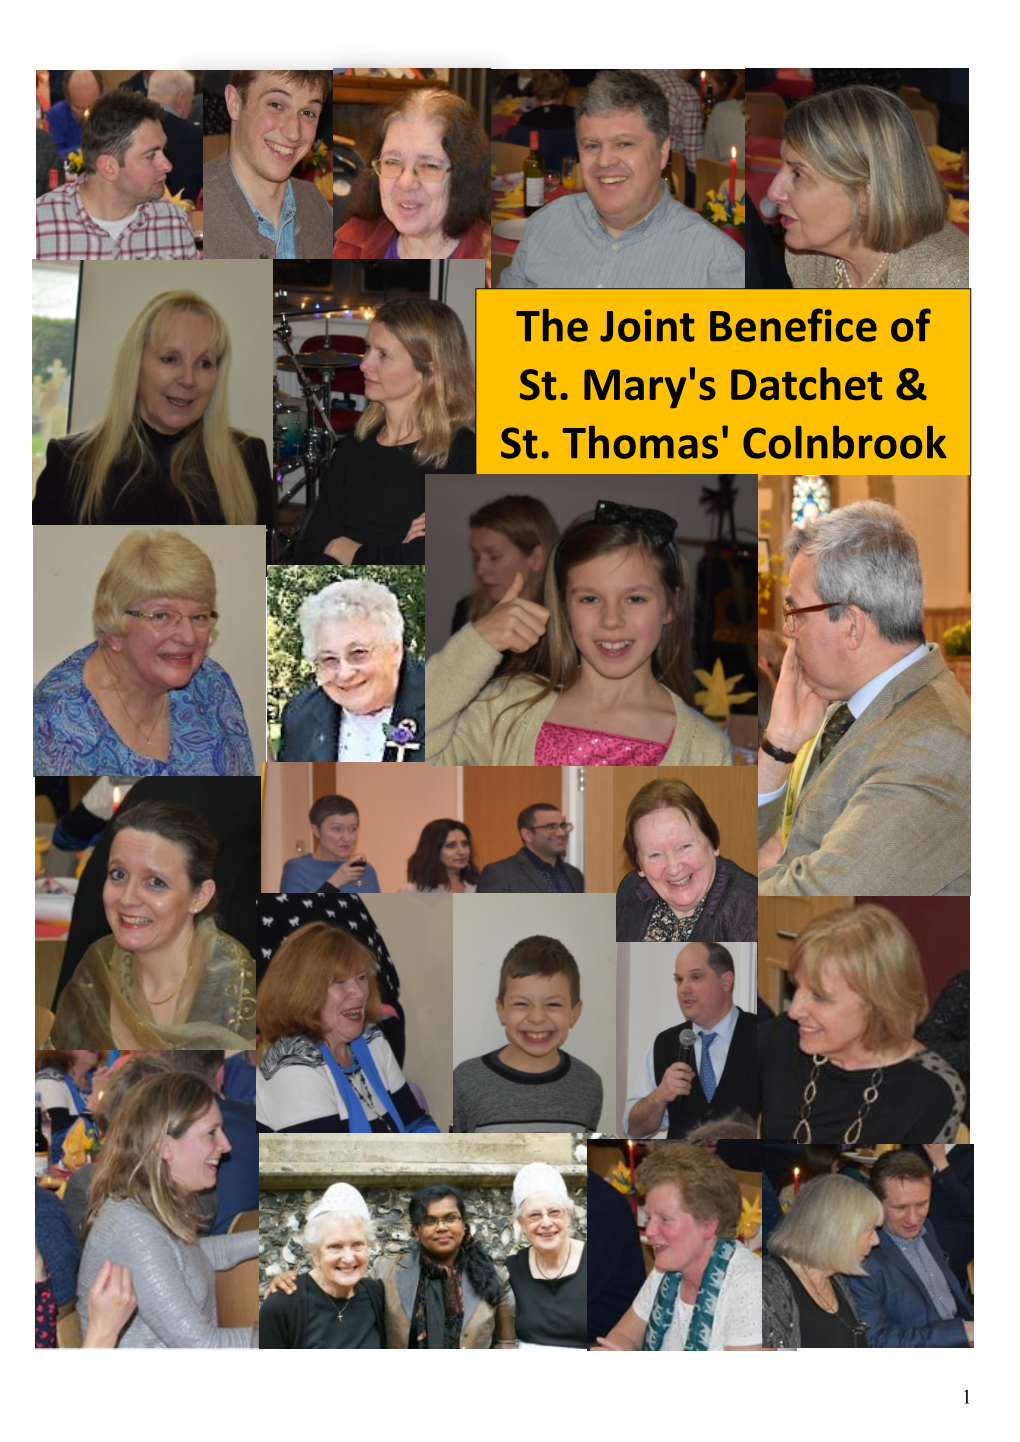 The Joint Benefice of St. Mary's Datchet & St. Thomas' Colnbrook